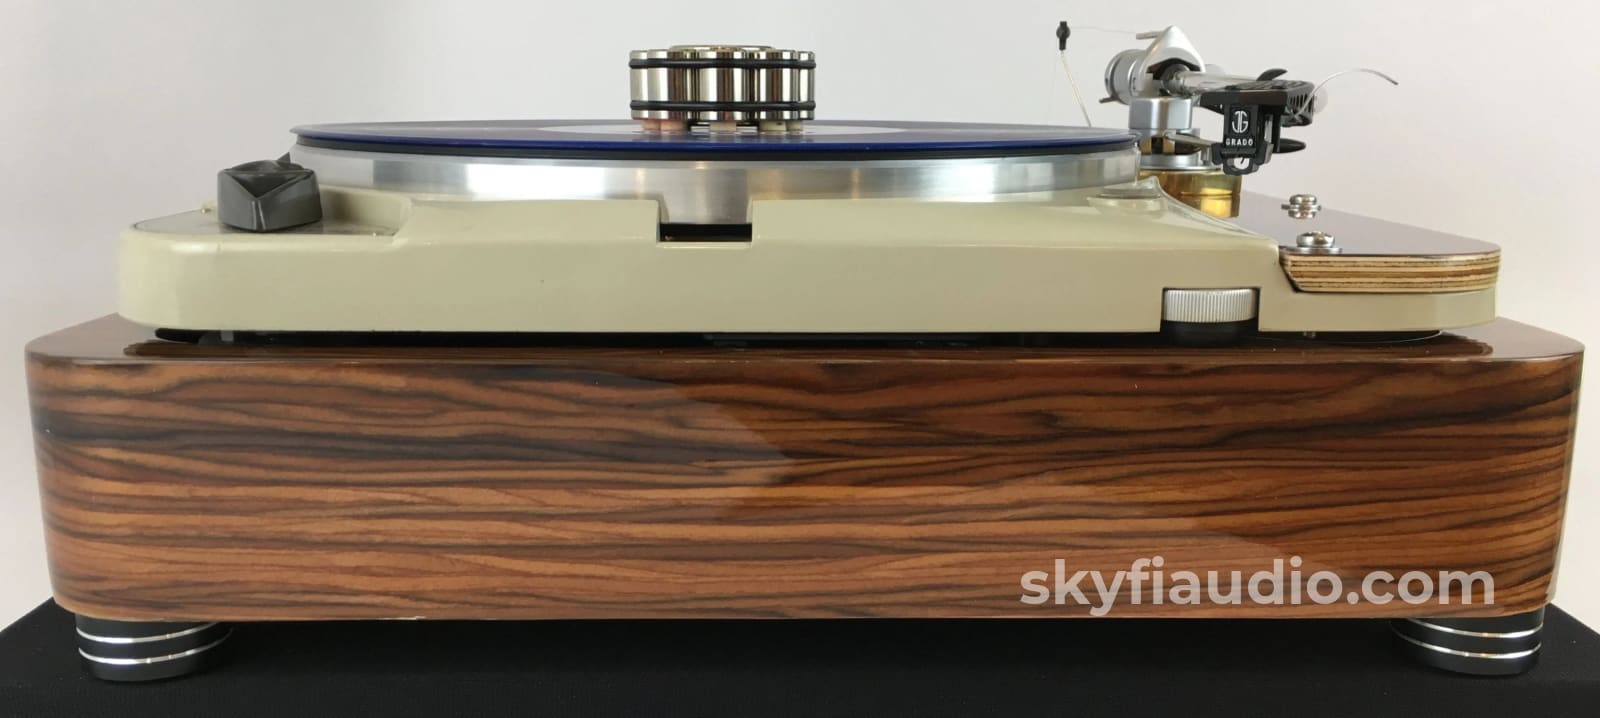 Thorens Td-124 With New Sme 3009 And Solid Rosewood Plinth Turntable